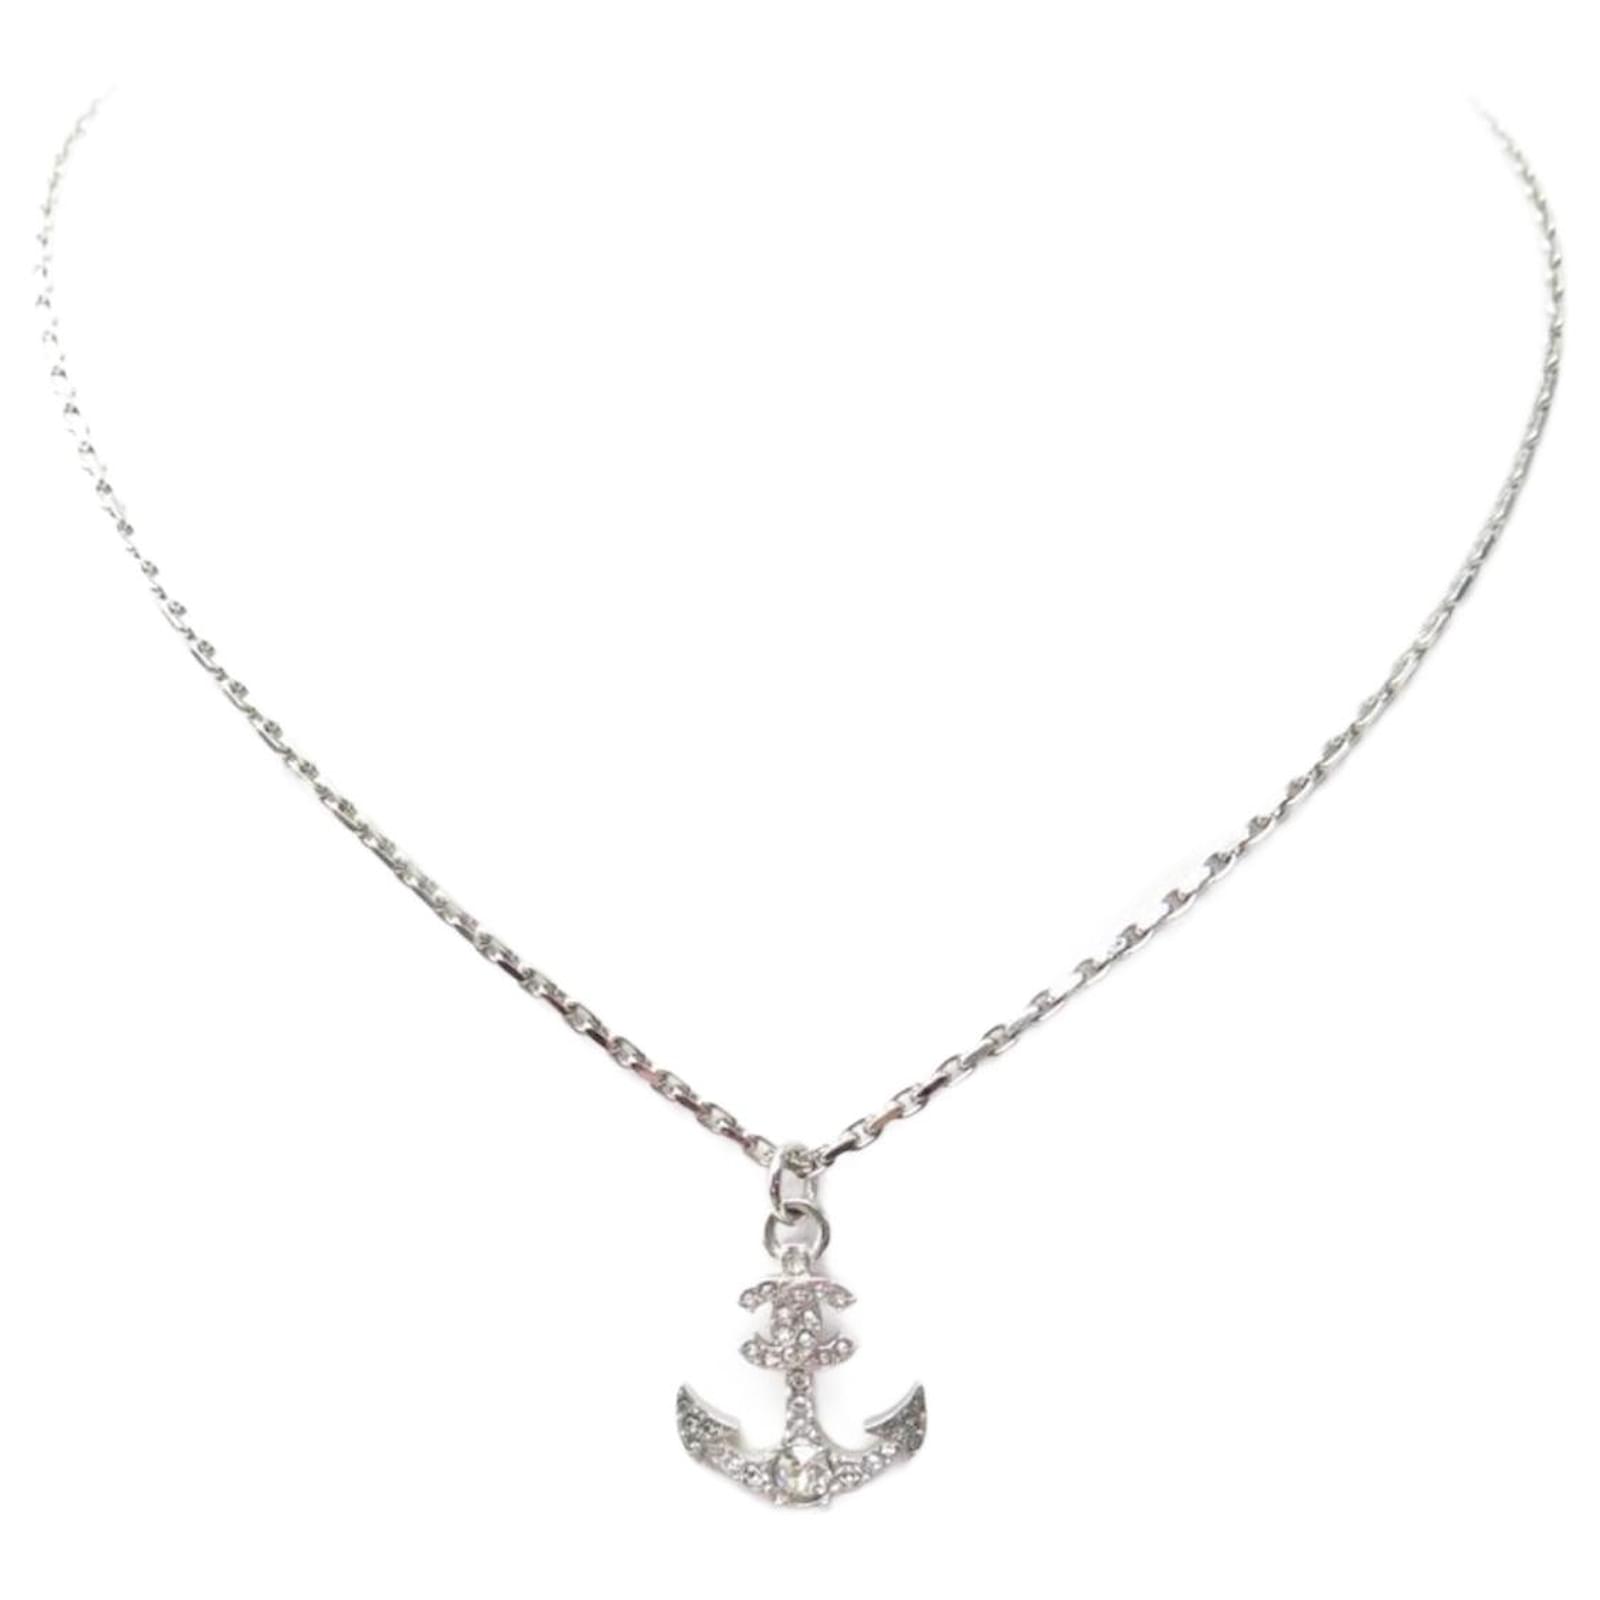 Necklaces Chanel New Rare Chanel Anchor Necklace Strass Logo CC Silver Metal Rhinestone Necklace